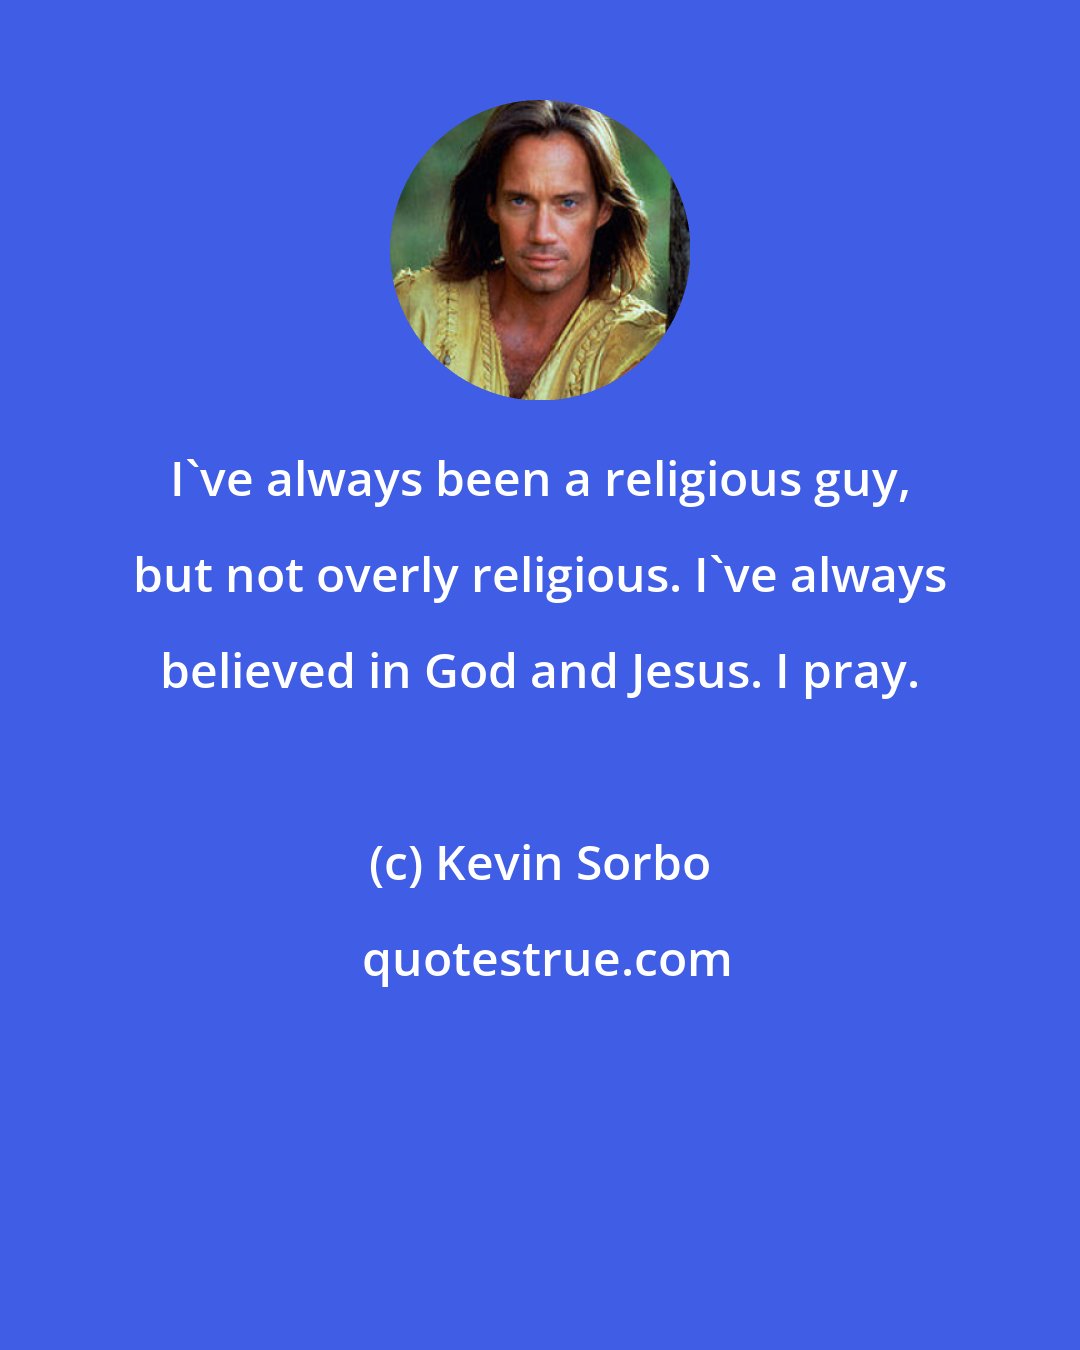 Kevin Sorbo: I've always been a religious guy, but not overly religious. I've always believed in God and Jesus. I pray.